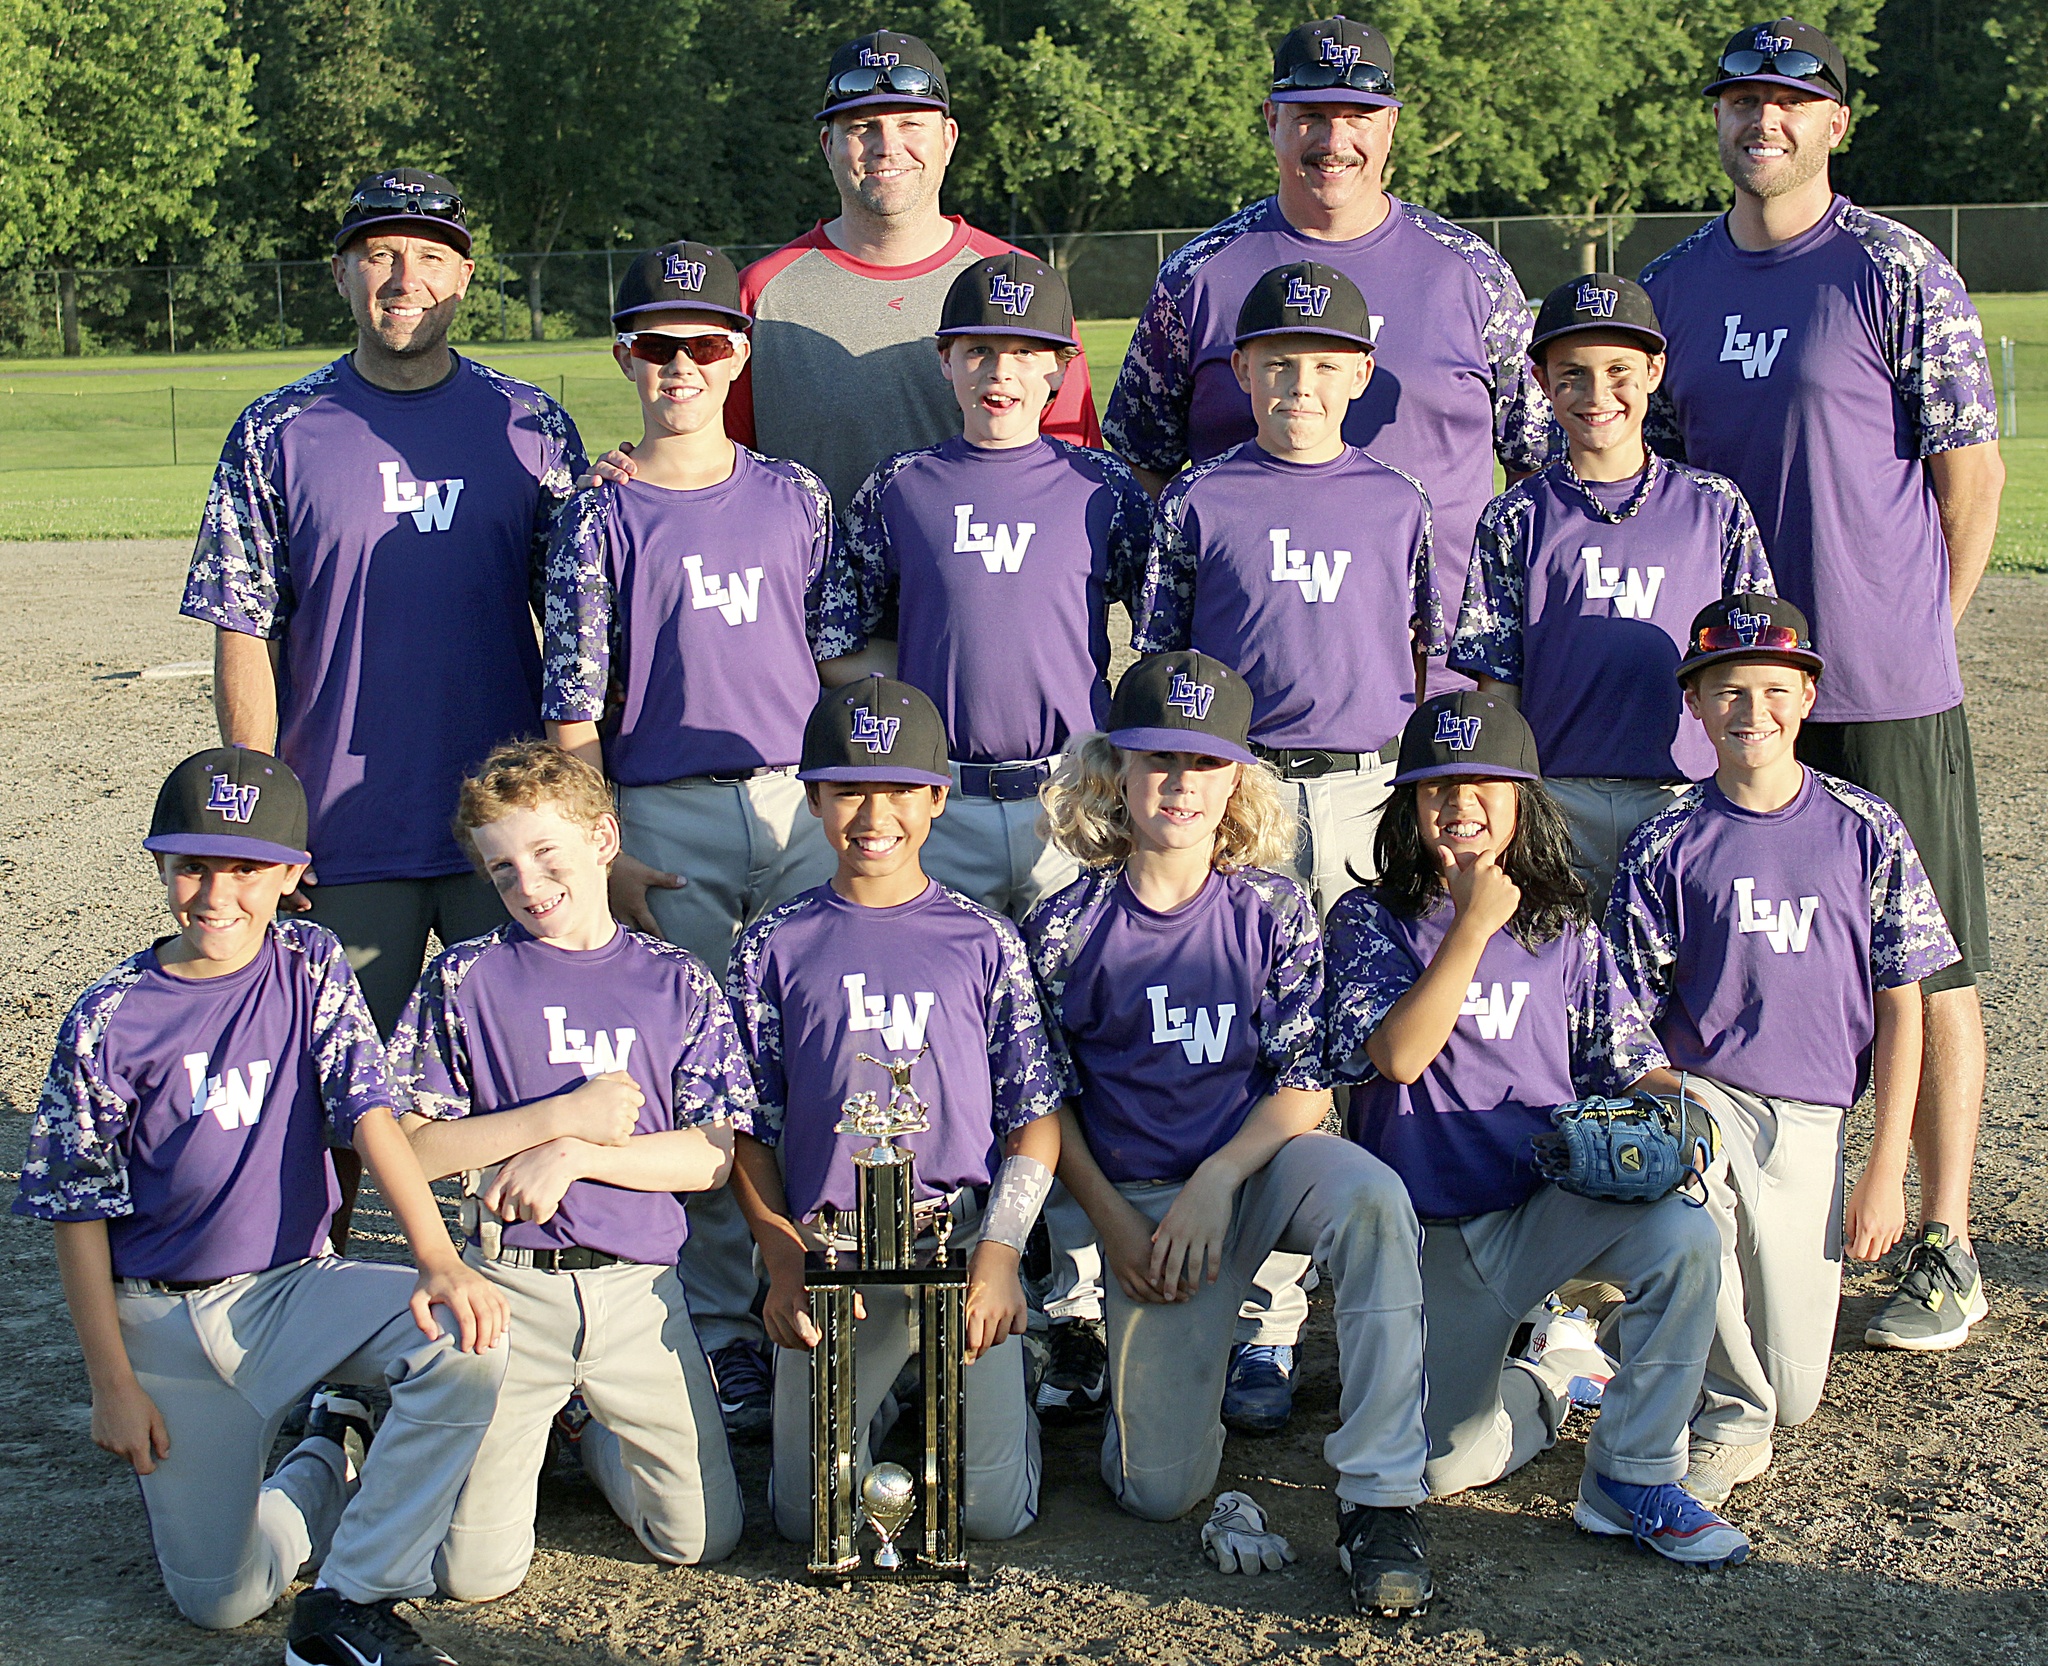 The LW Select 10U baseball team repeated as champions of the Legends Baseball tournament this weekend. - Contributed photo